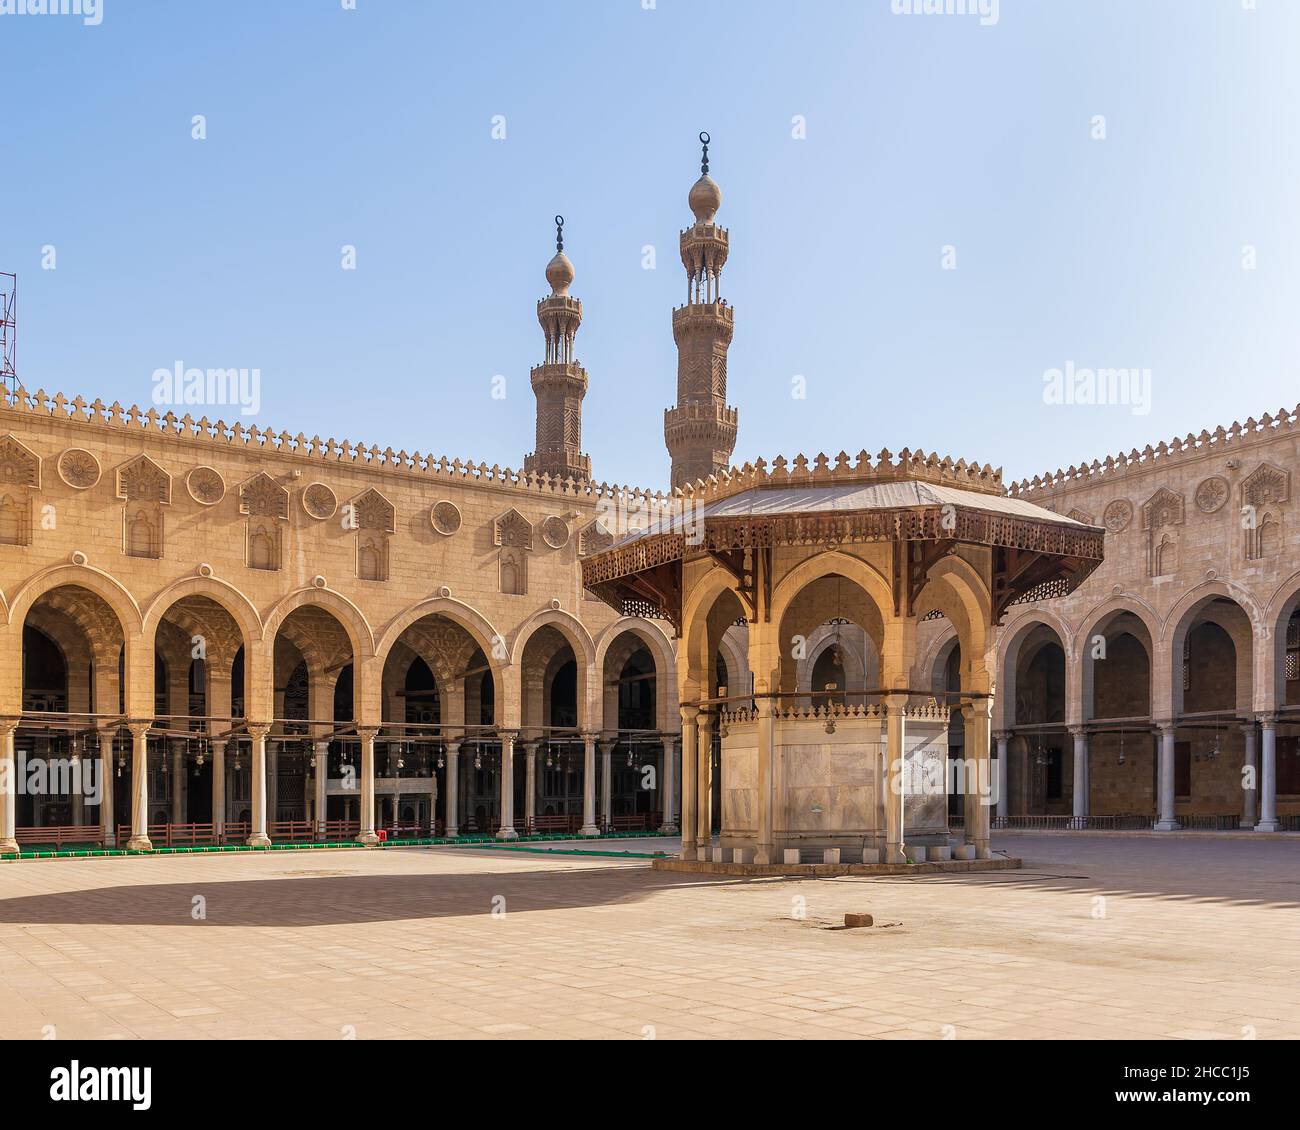 Ablution fountain mediating the courtyard of public historic mosque of Sultan al Muayyad, with background of arched corridors surrounding the courtyard, and minarets of the mosque, Cairo, Egypt Stock Photo